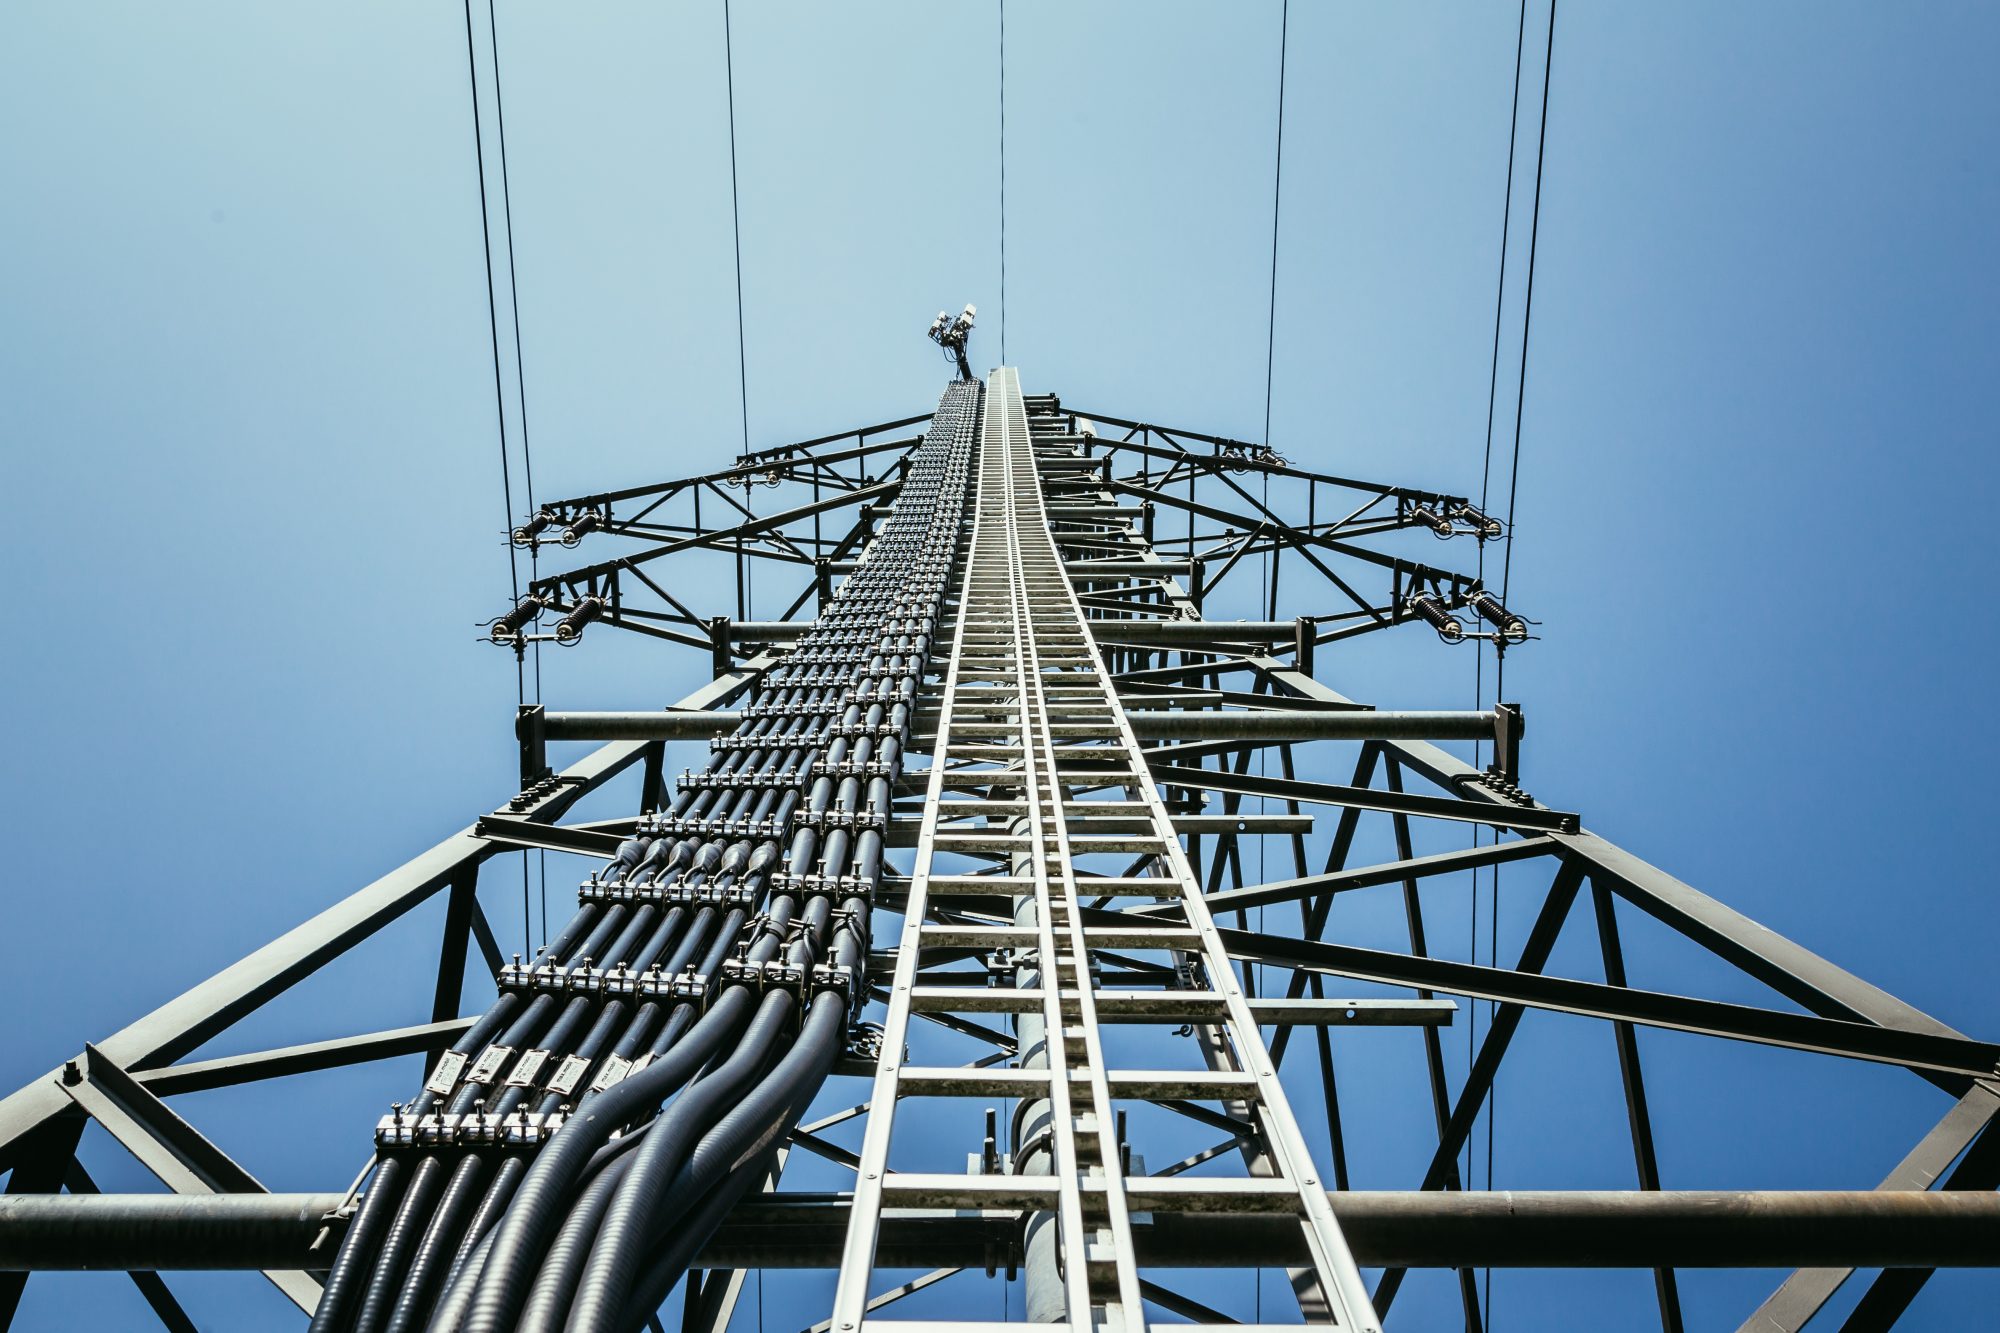 Picture of an electrical tower or pylon, blue sky in the background